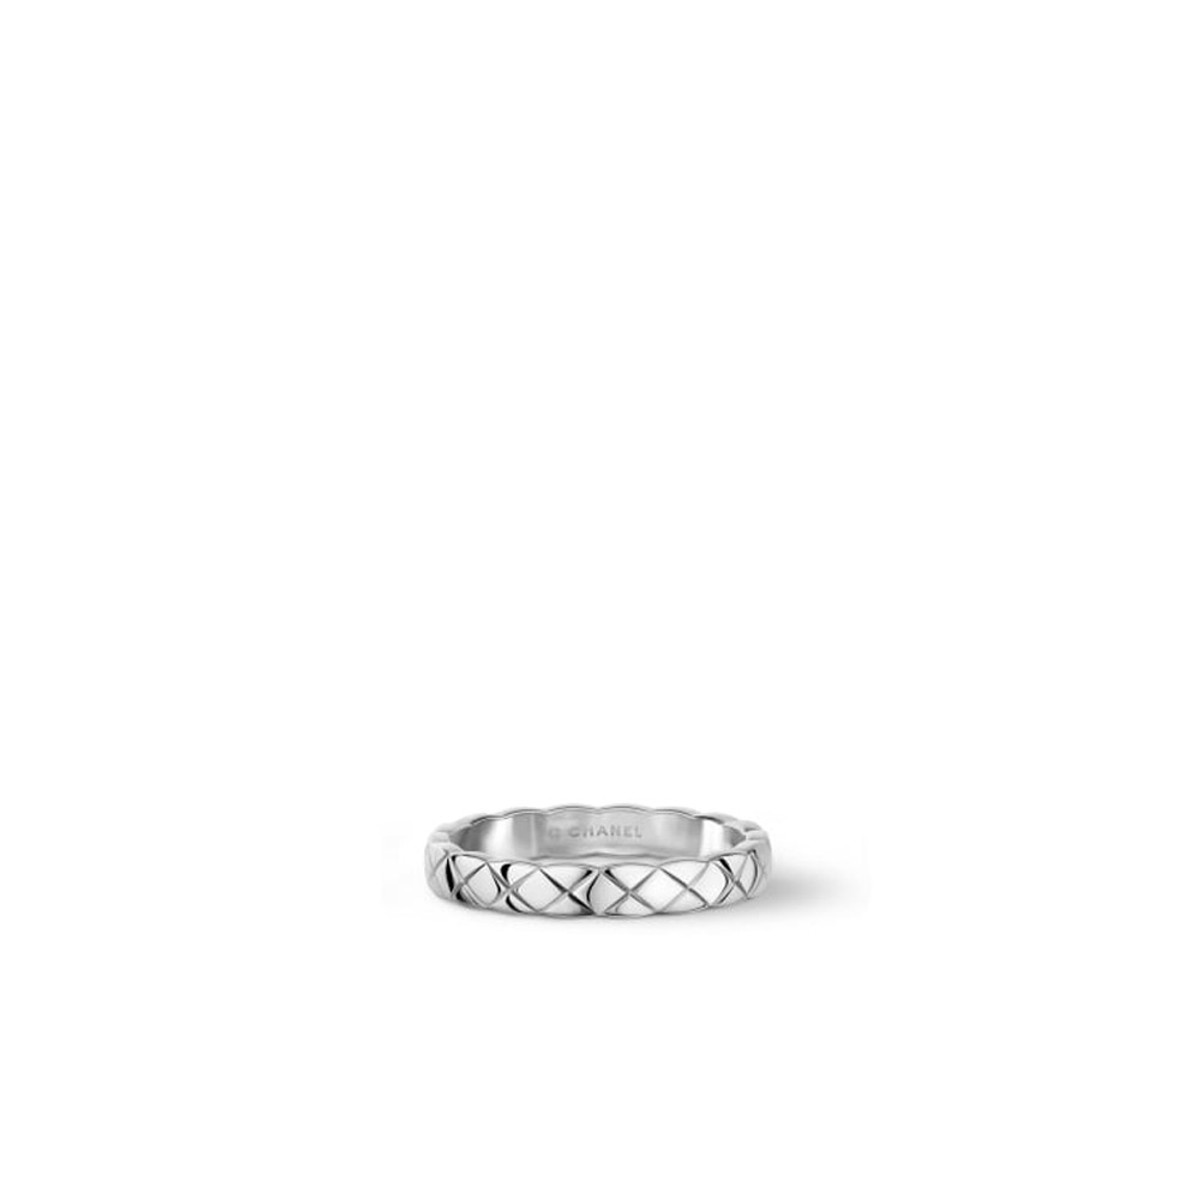 CHANEL COCO CRUSH RING-22511 Product Image